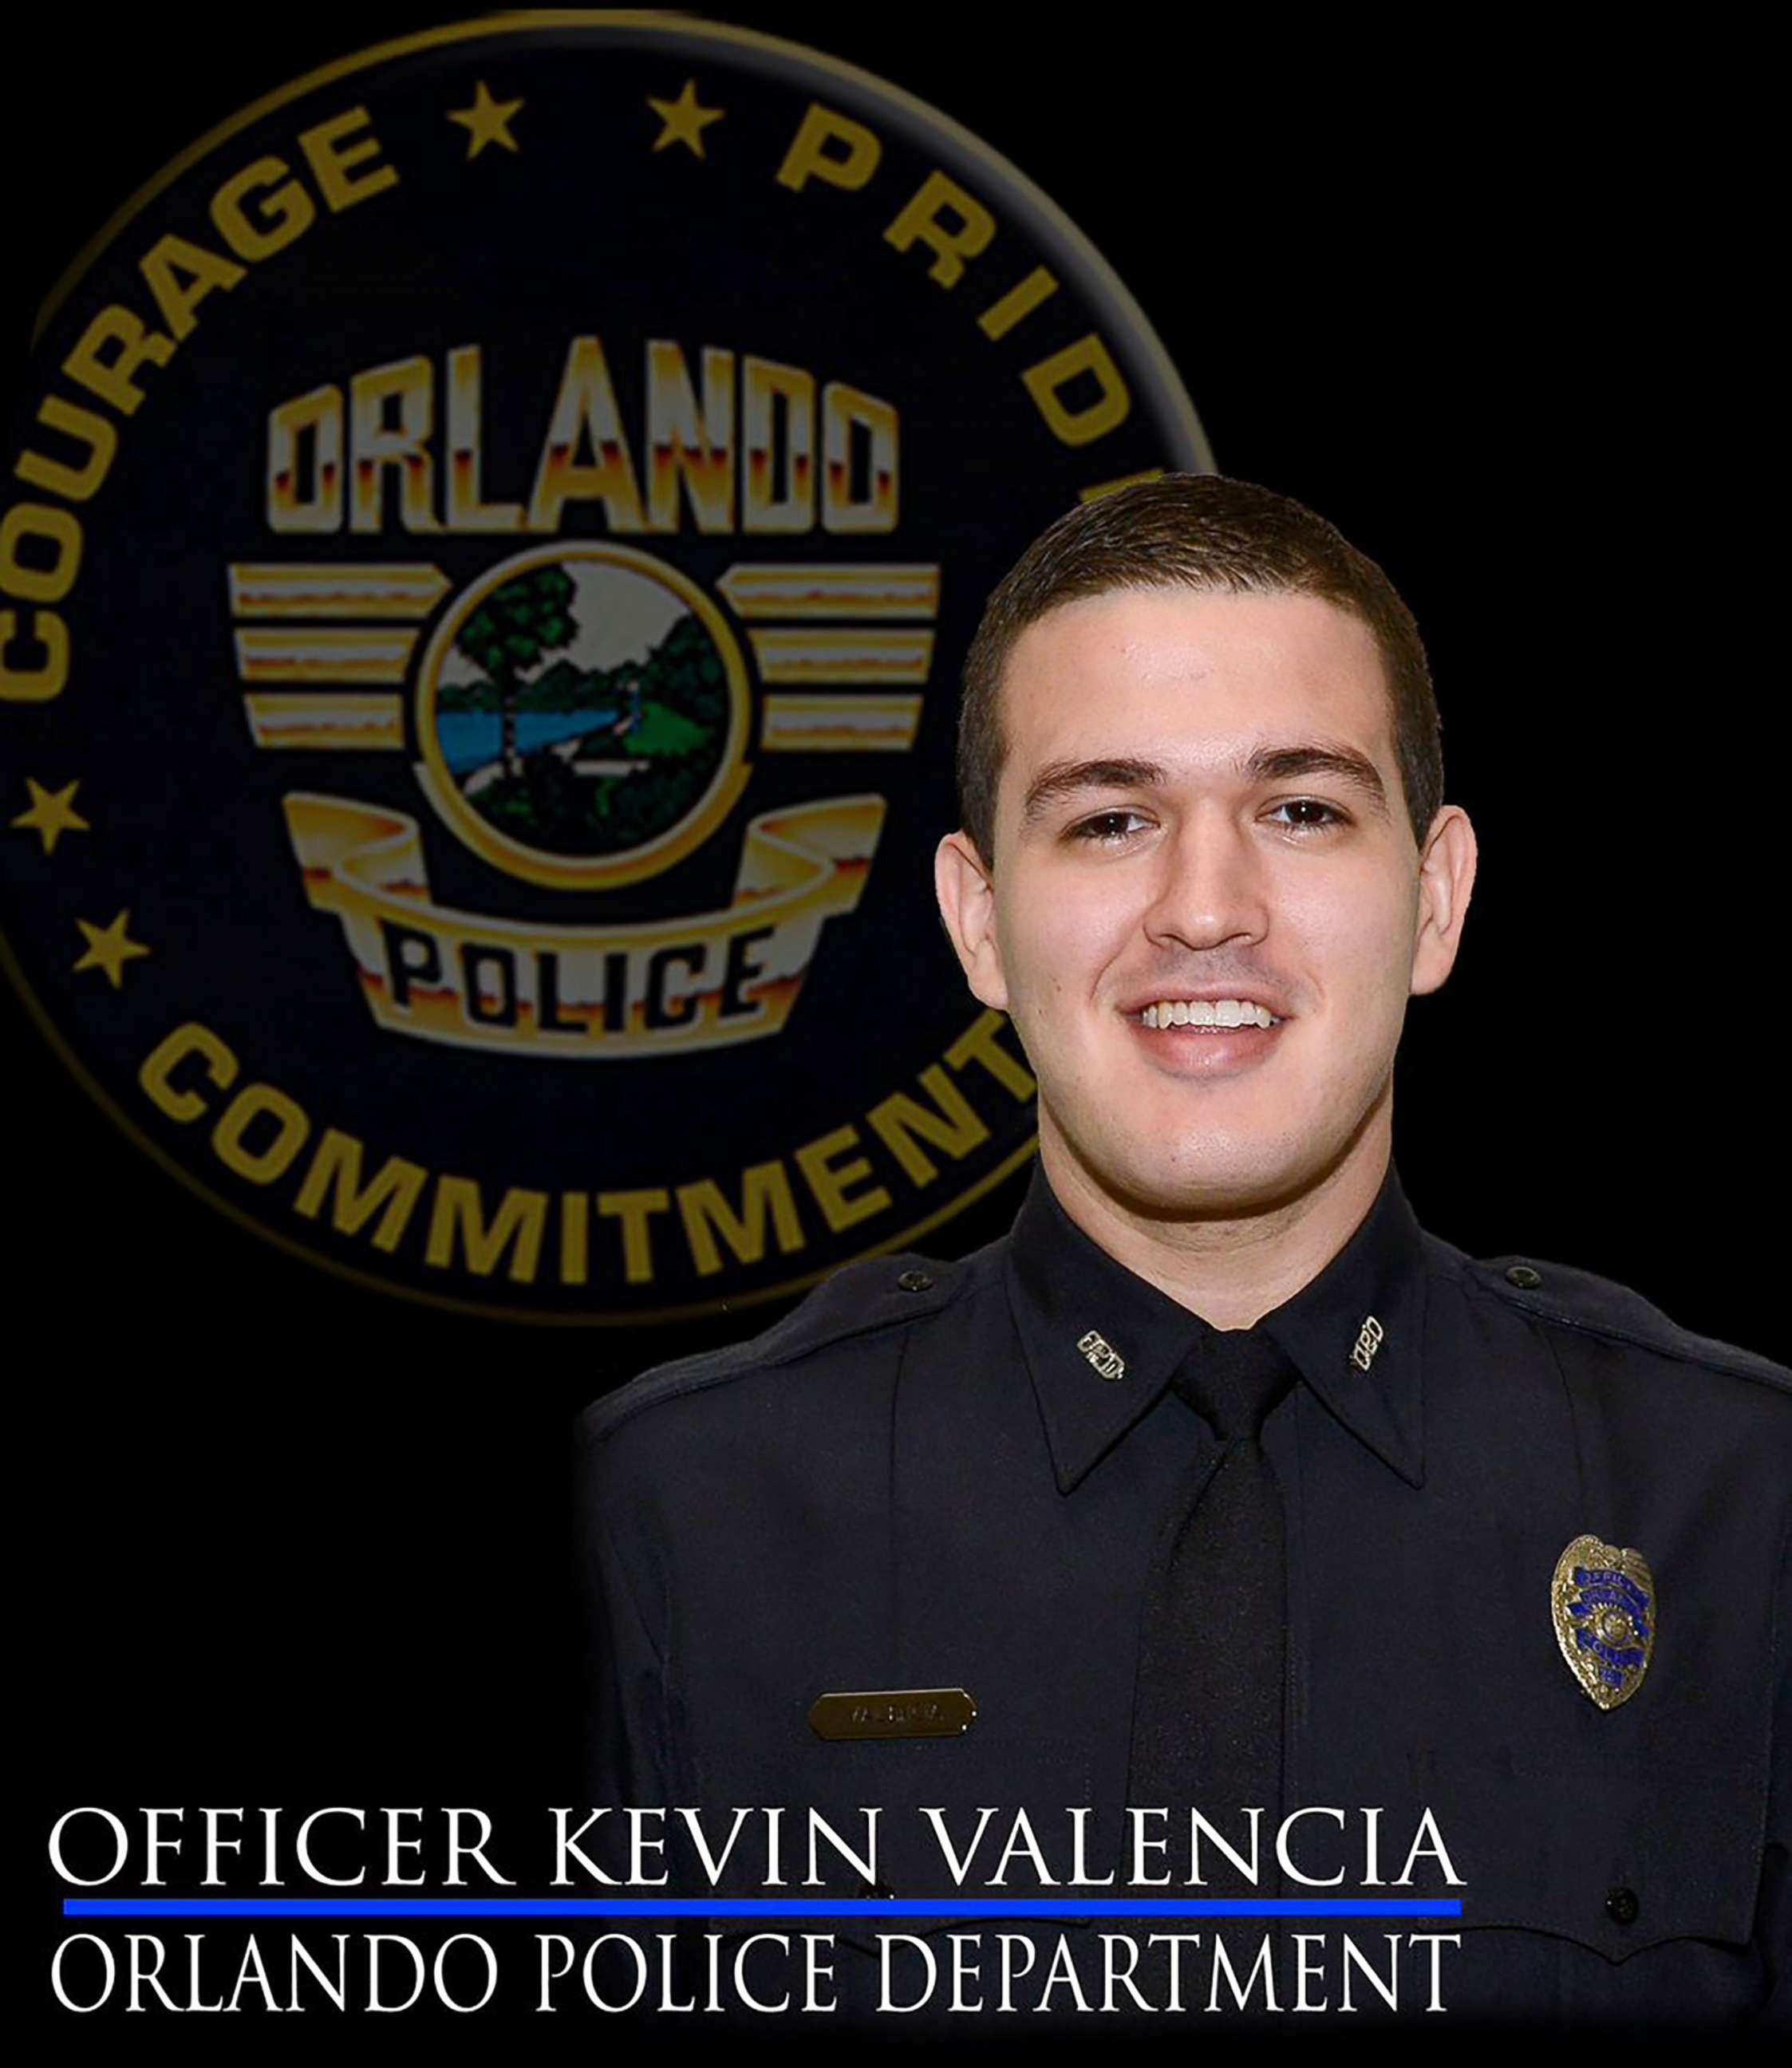 PHOTO: Officer Kevin Valencia is pictured in this undated photo released by Orlando Police Department.